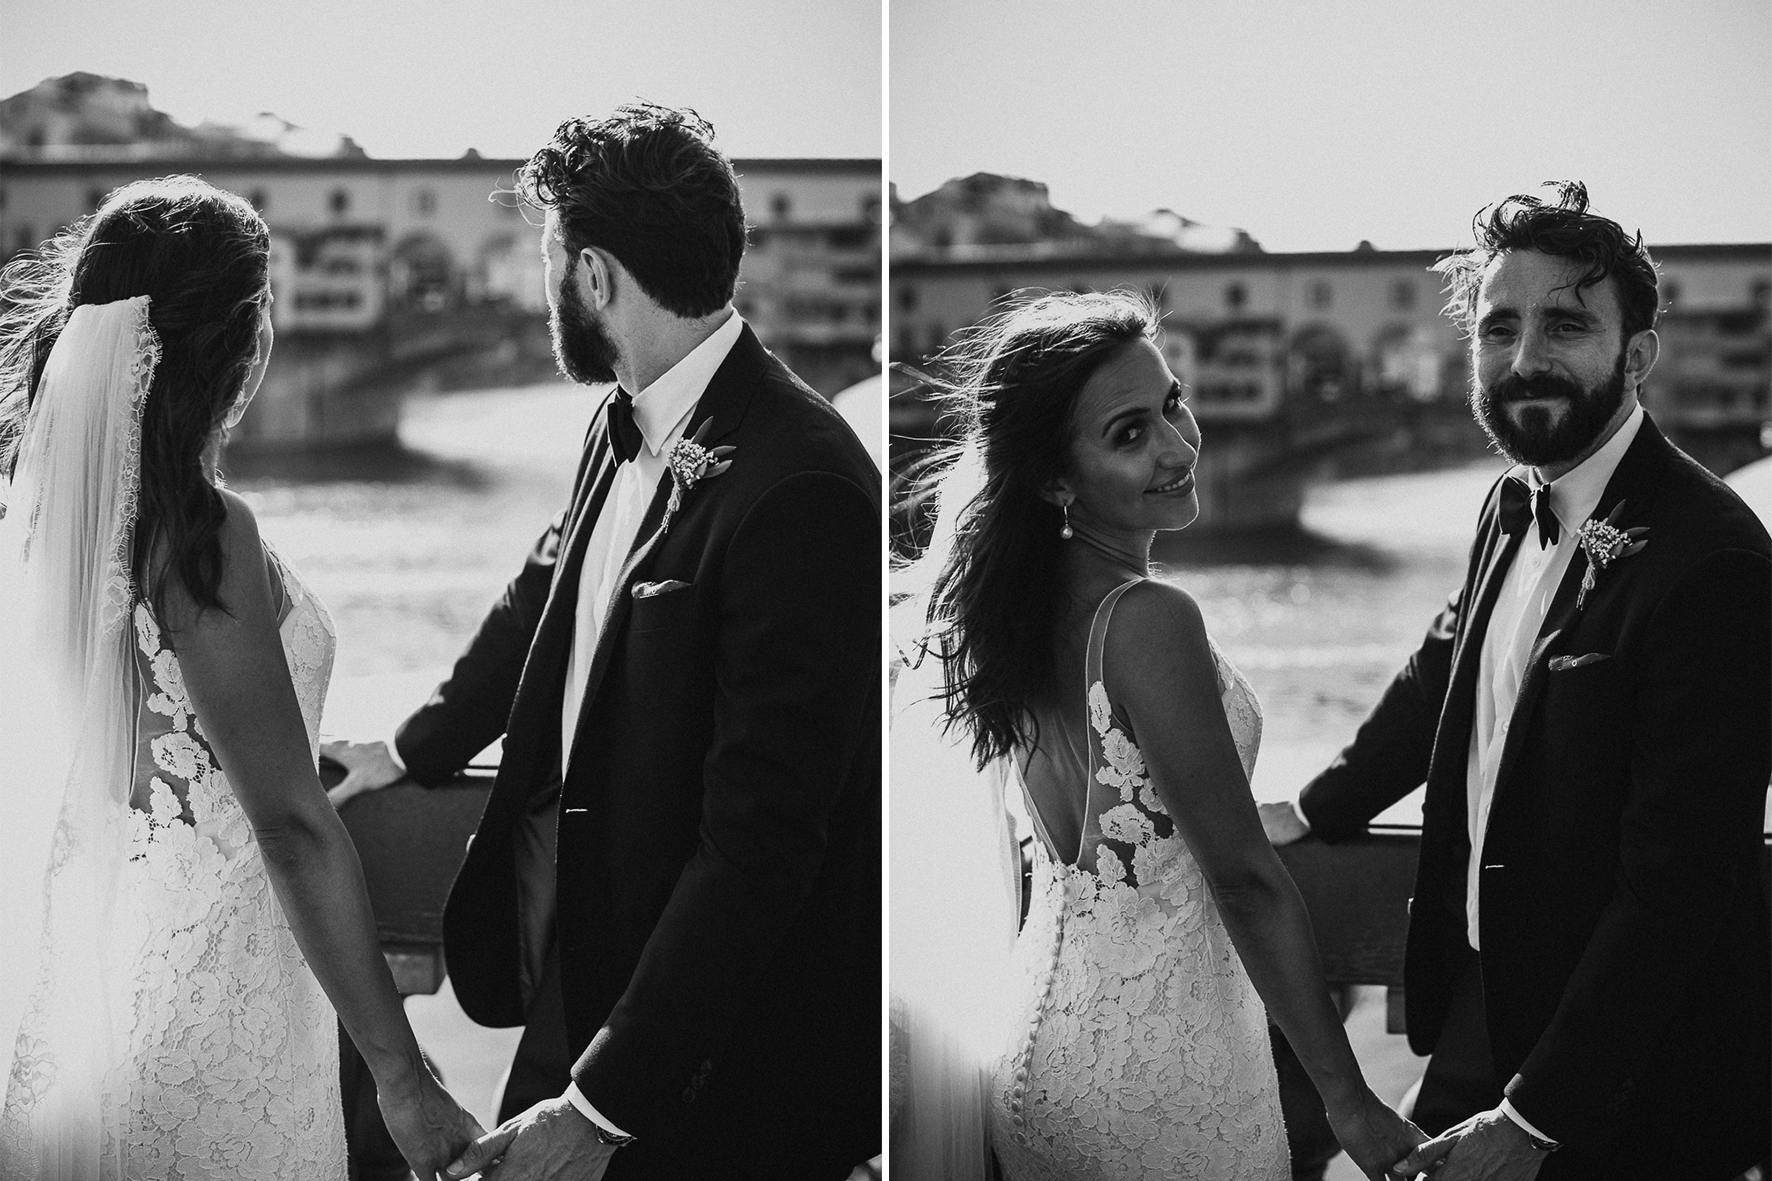 Wedding_style_in_Florence